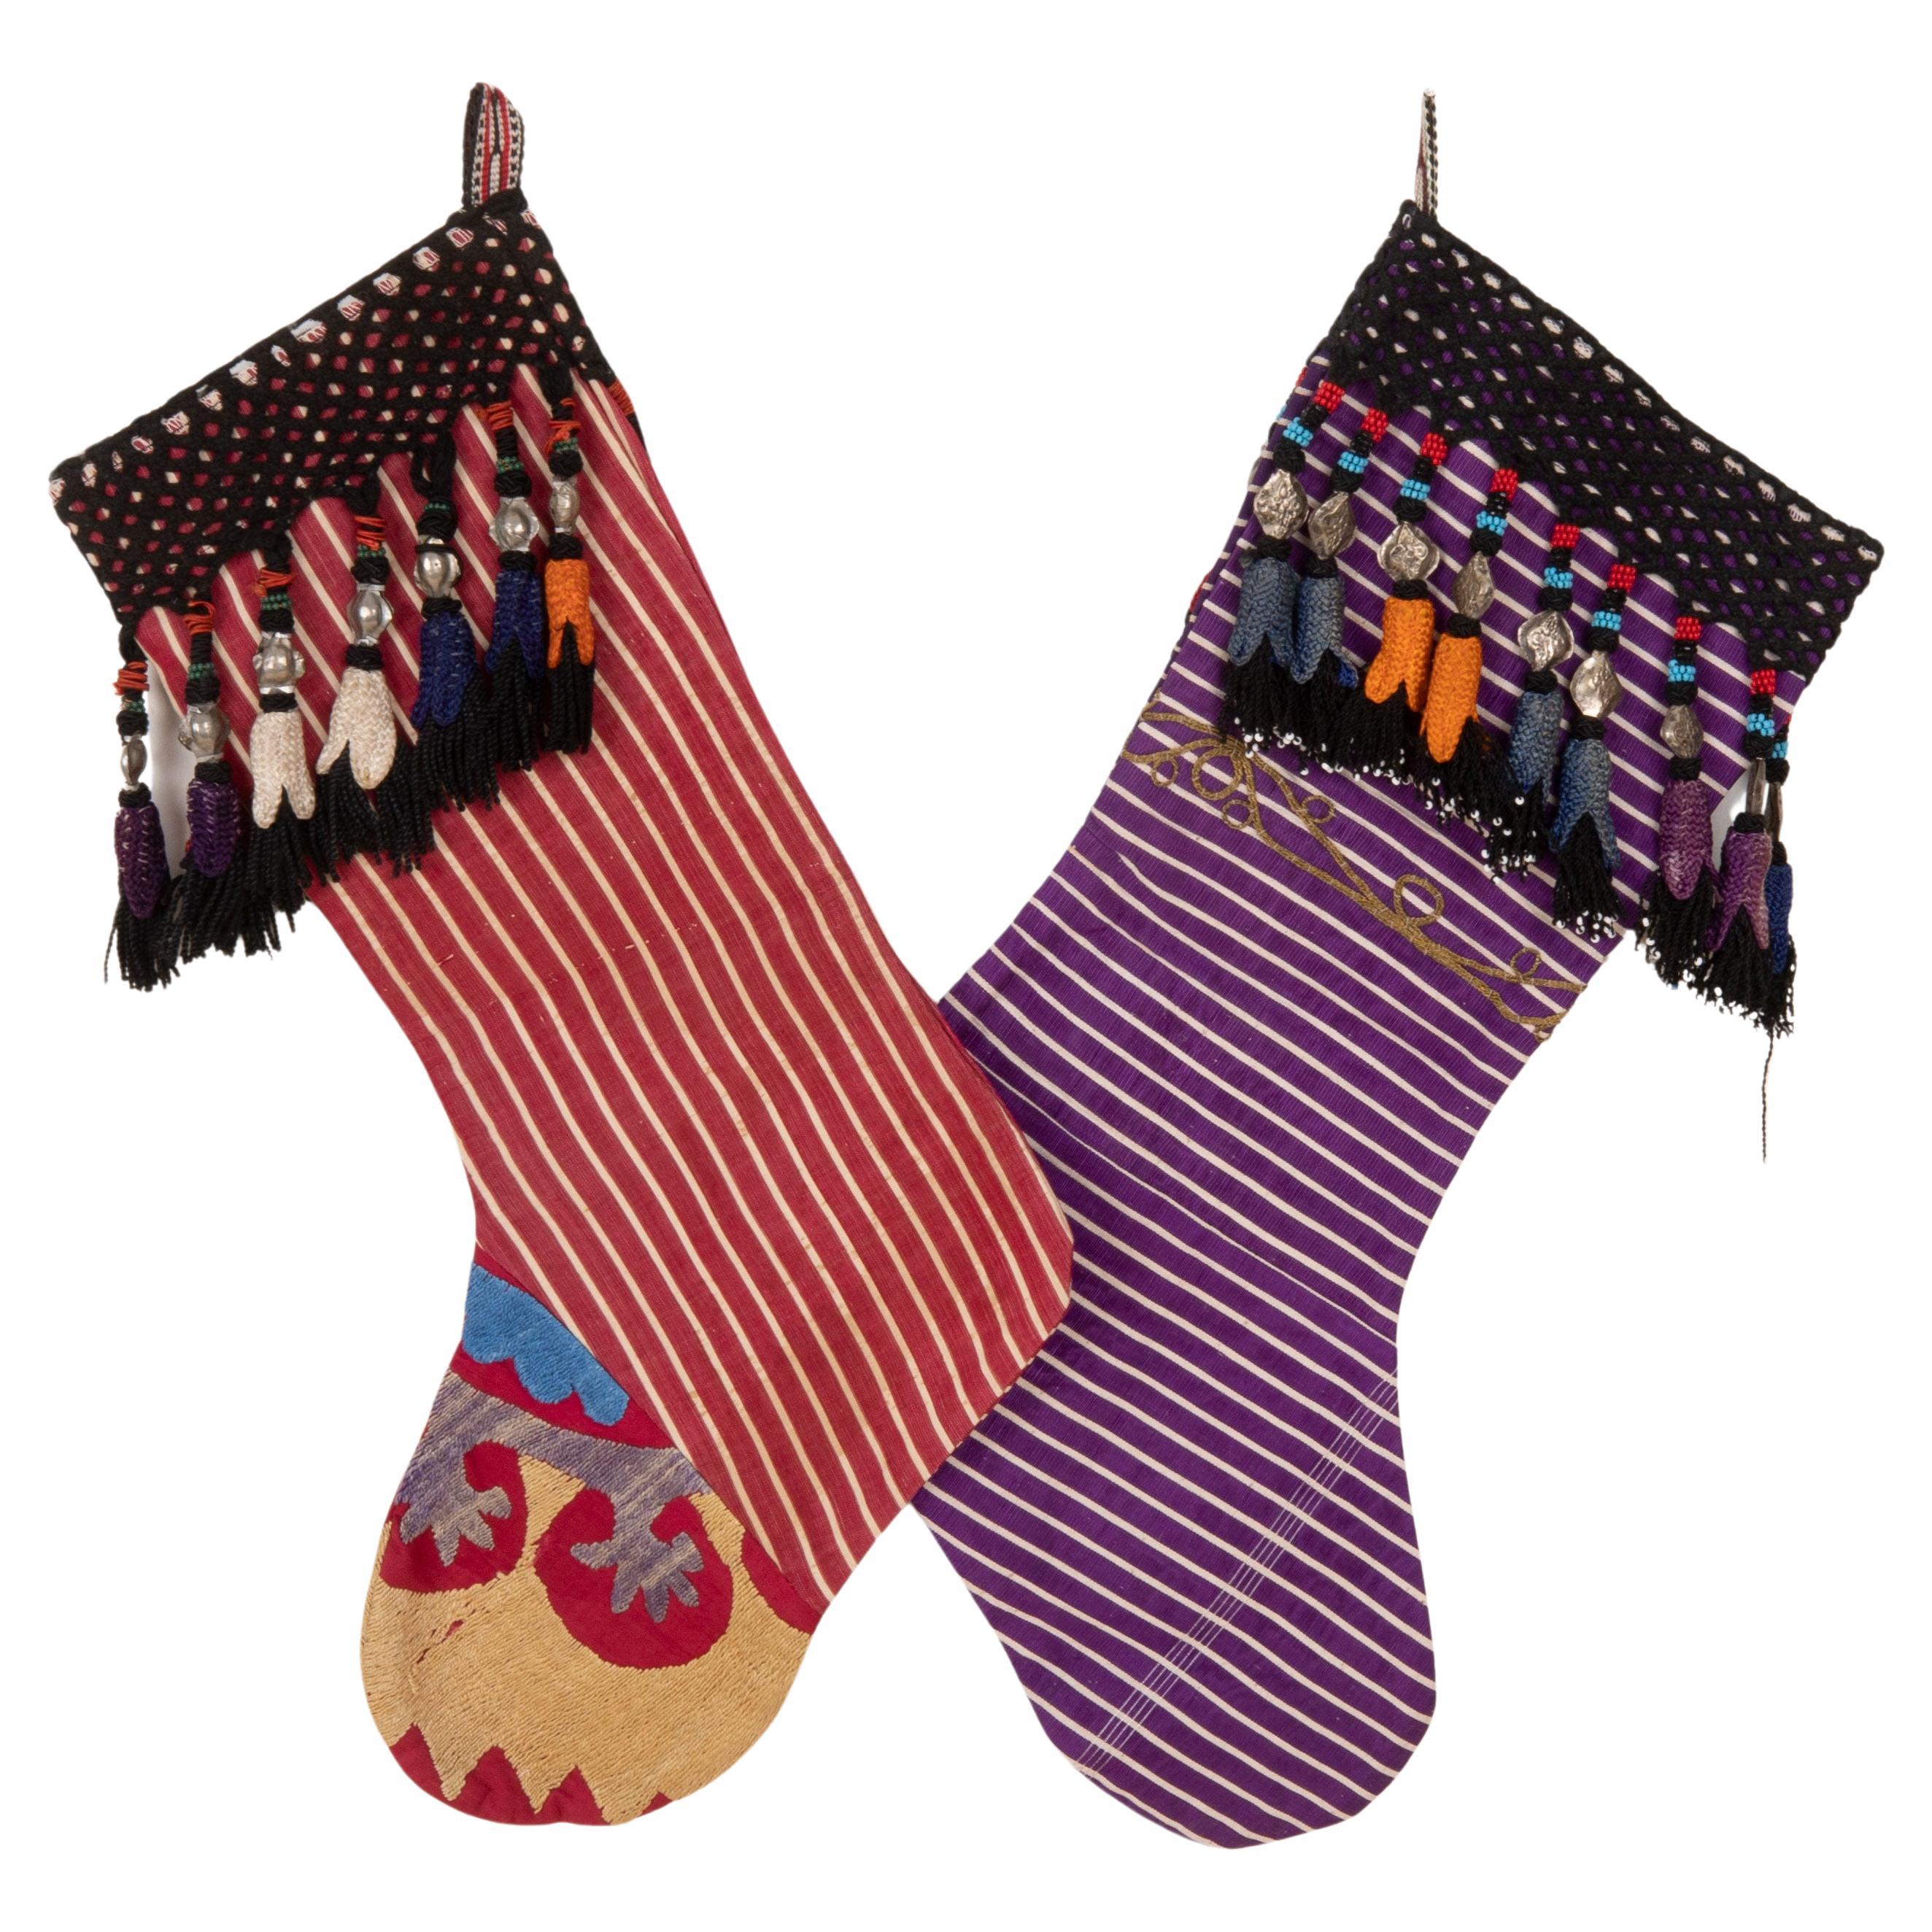 Double Sided Christmas Stockings Made from Vintage Turkish and Uzbek Textile Fra